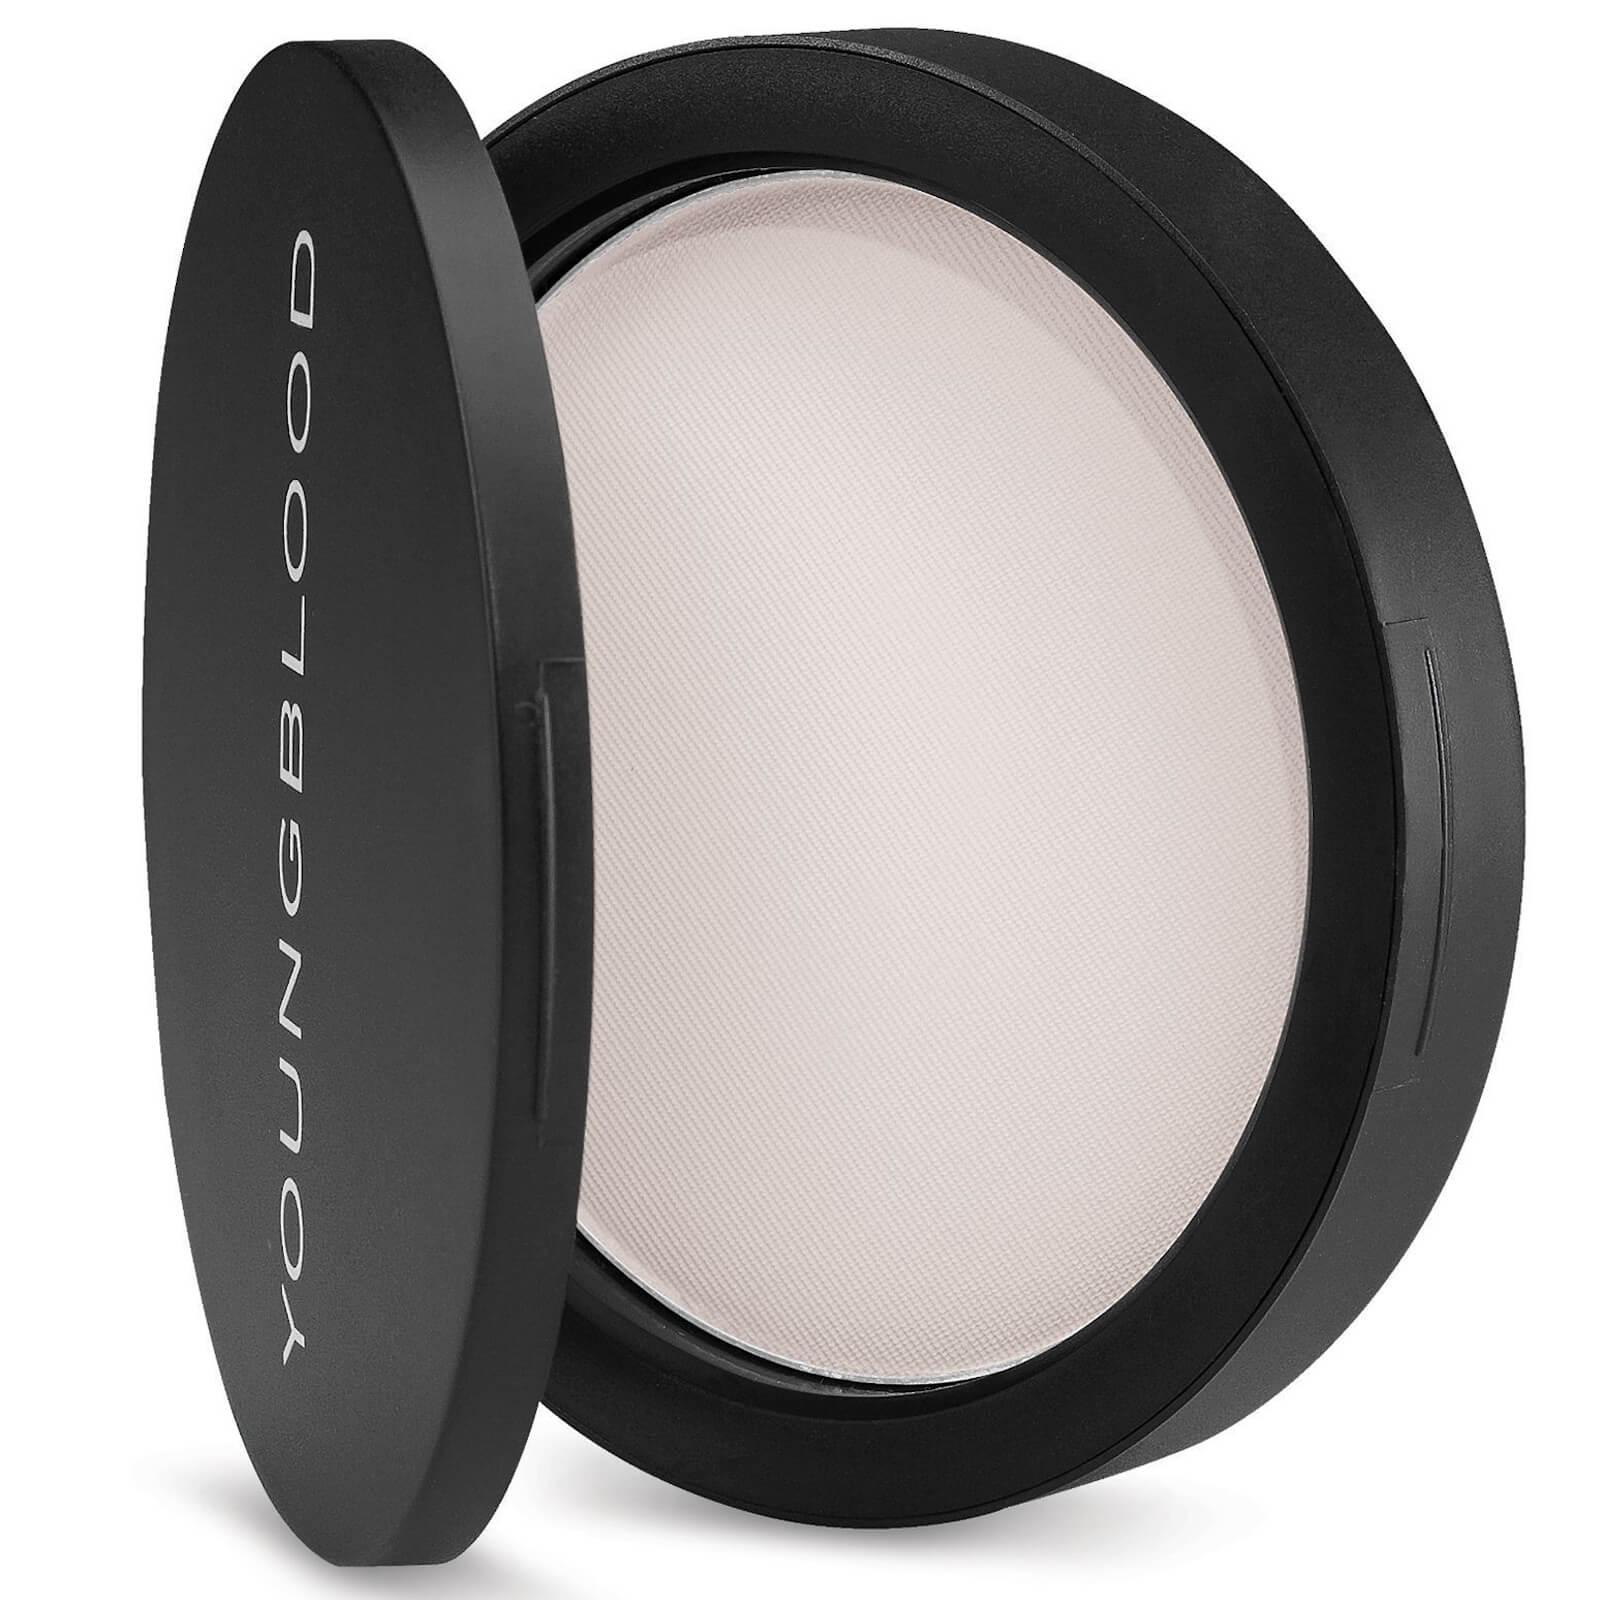 Youngblood Mineral Cosmetics Youngblood Mineral Rice Pressed Setting Powder 10g (Various Shades) - Light